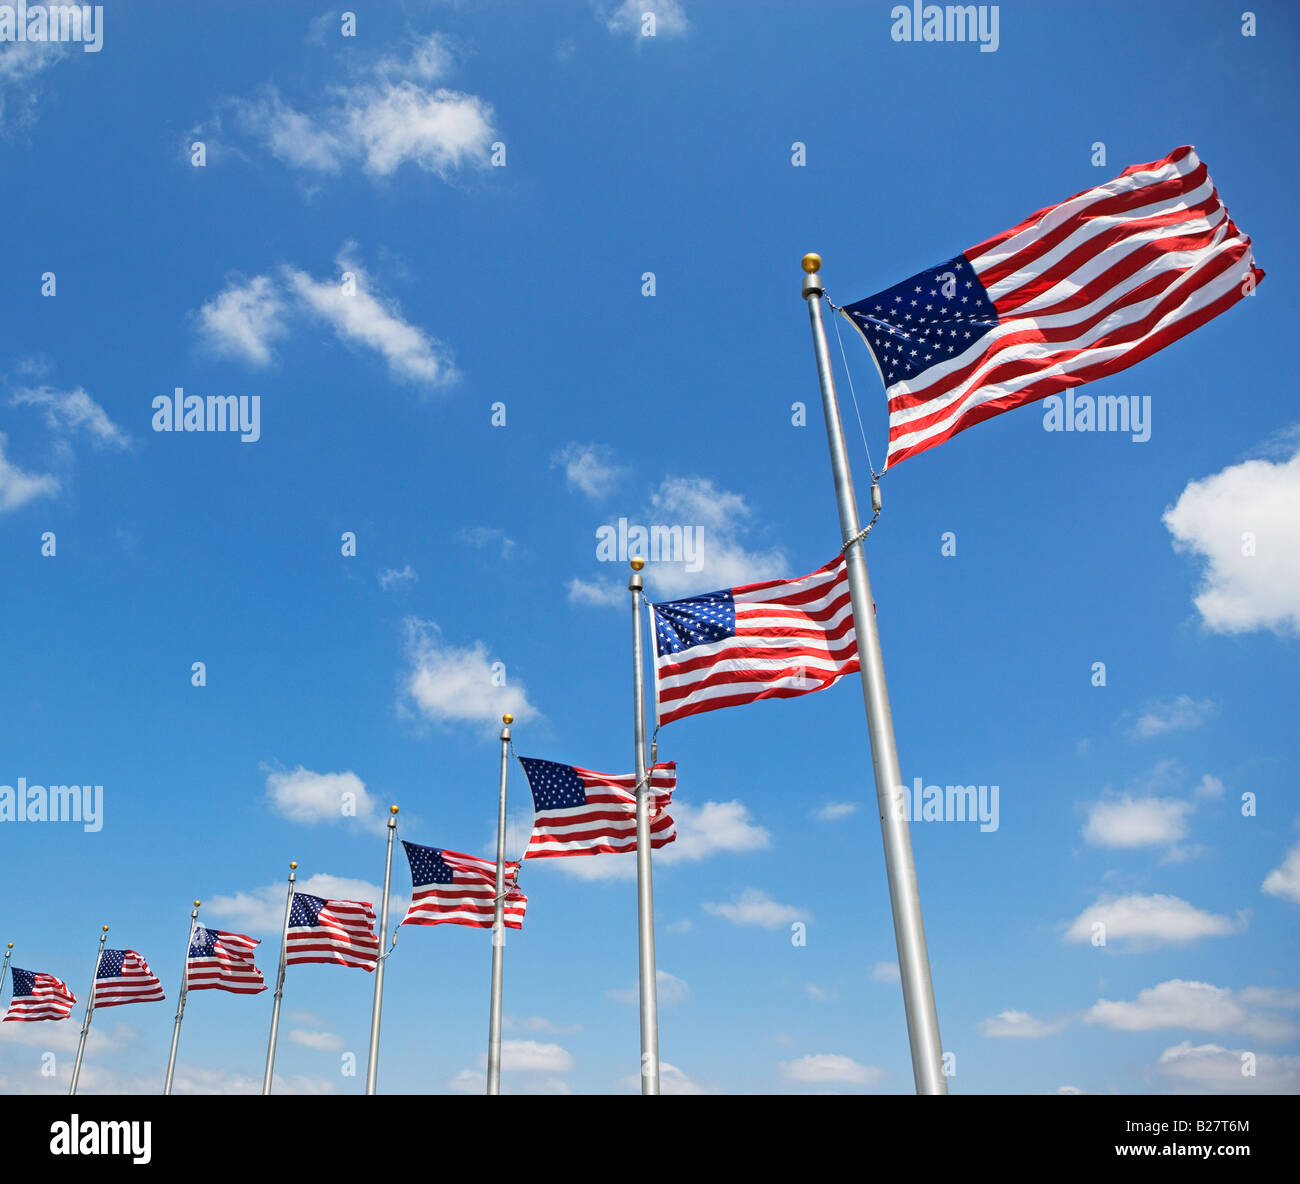 Low angle view of American flags, Washington DC, United States Banque D'Images